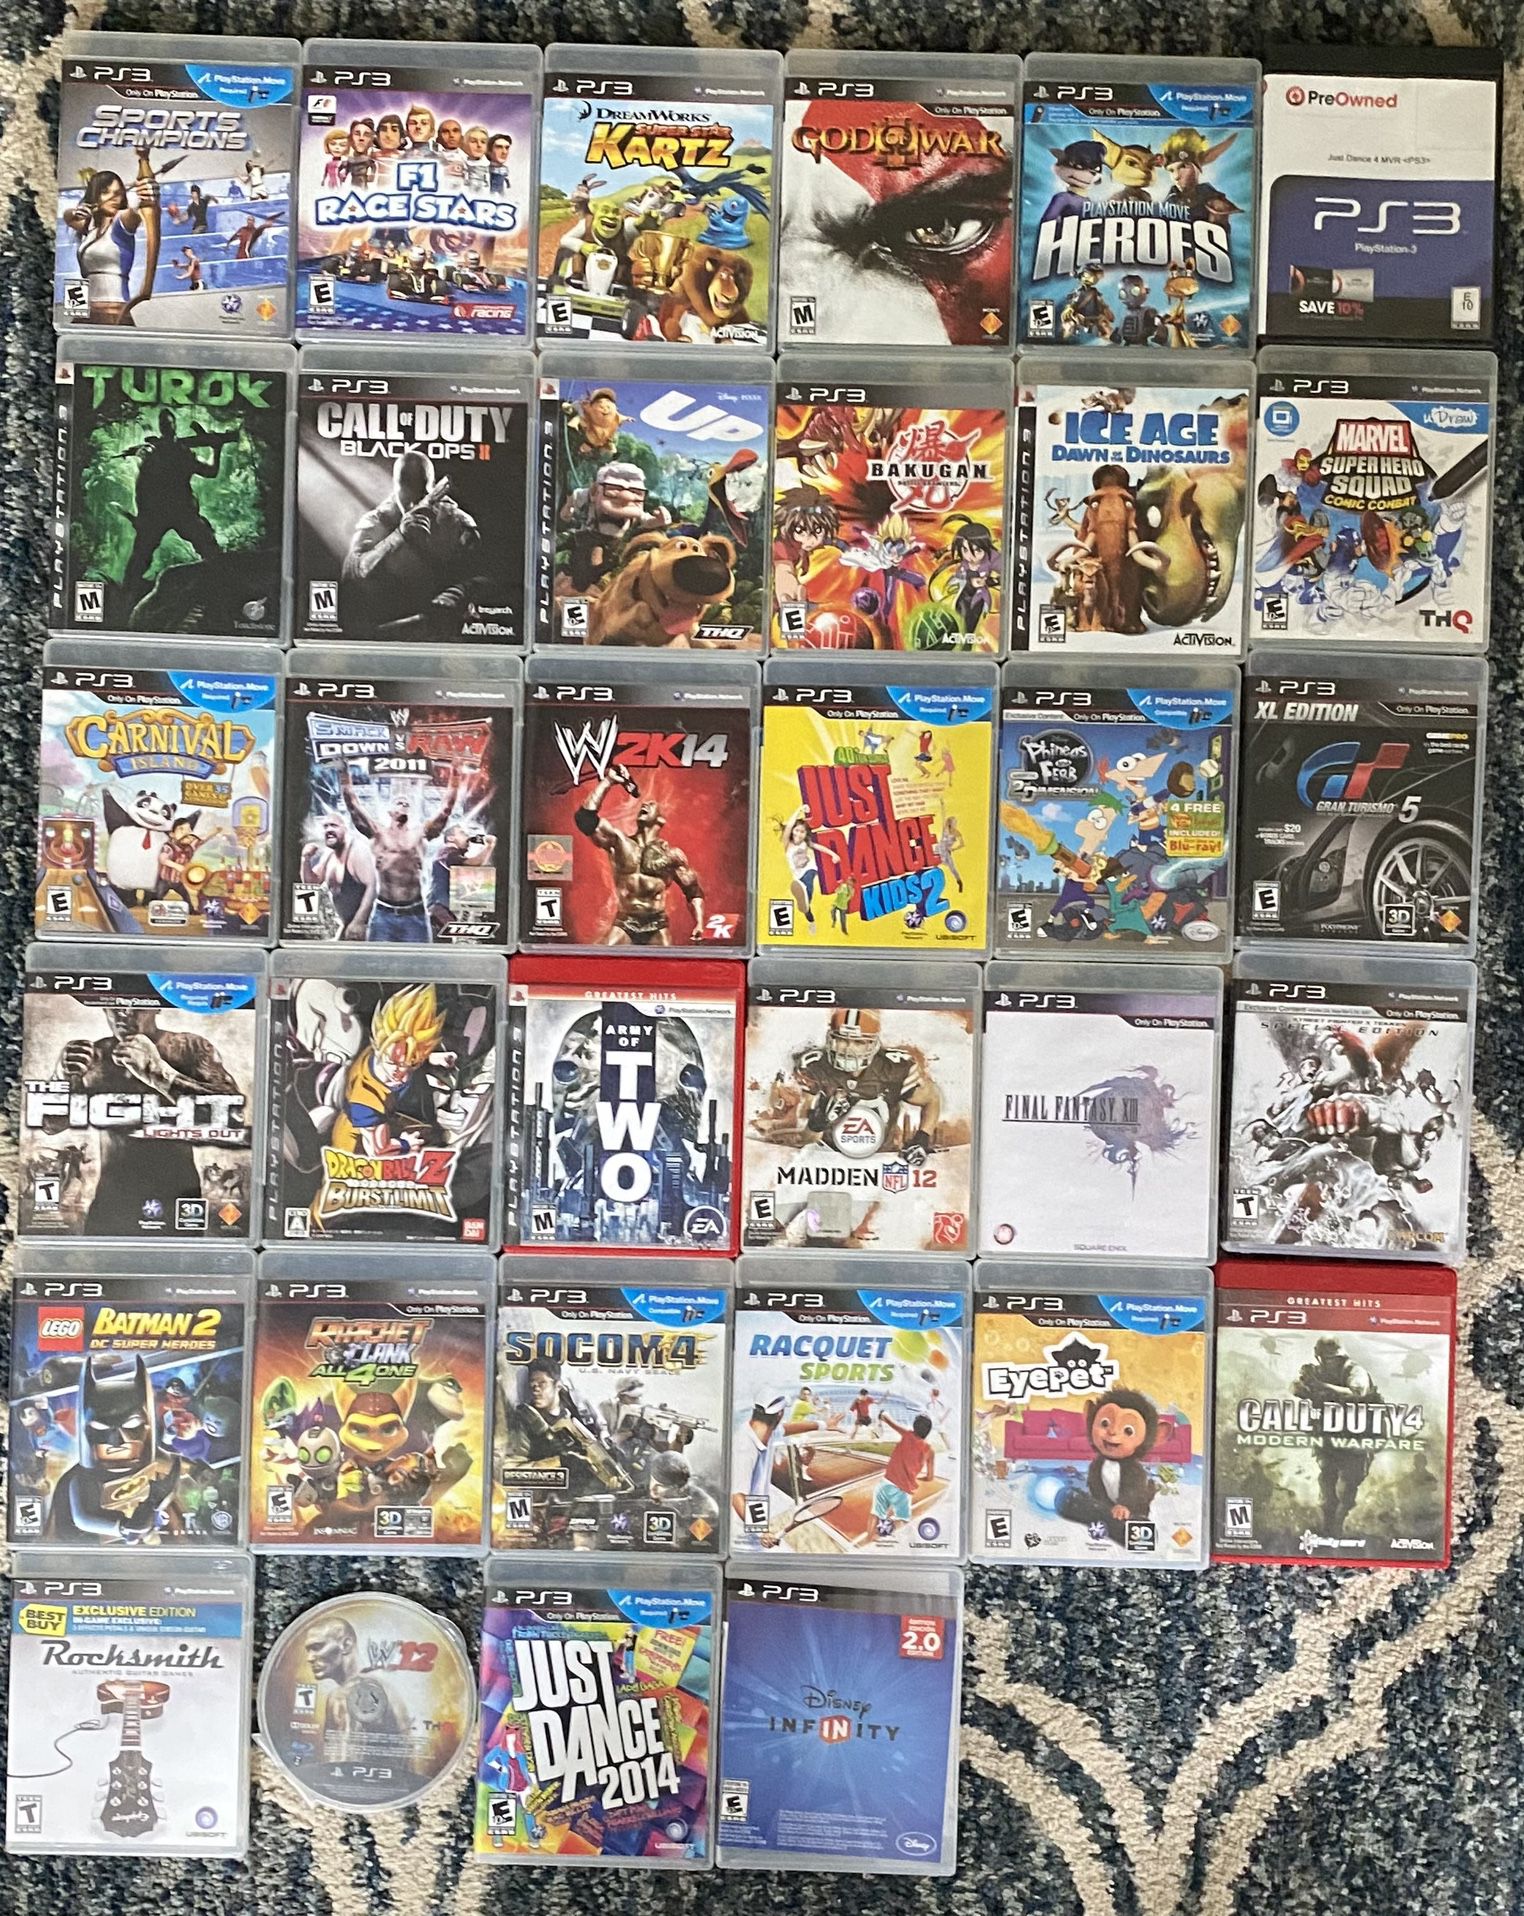 PS3 Video Games - Read Description To See Which Games Are Sold